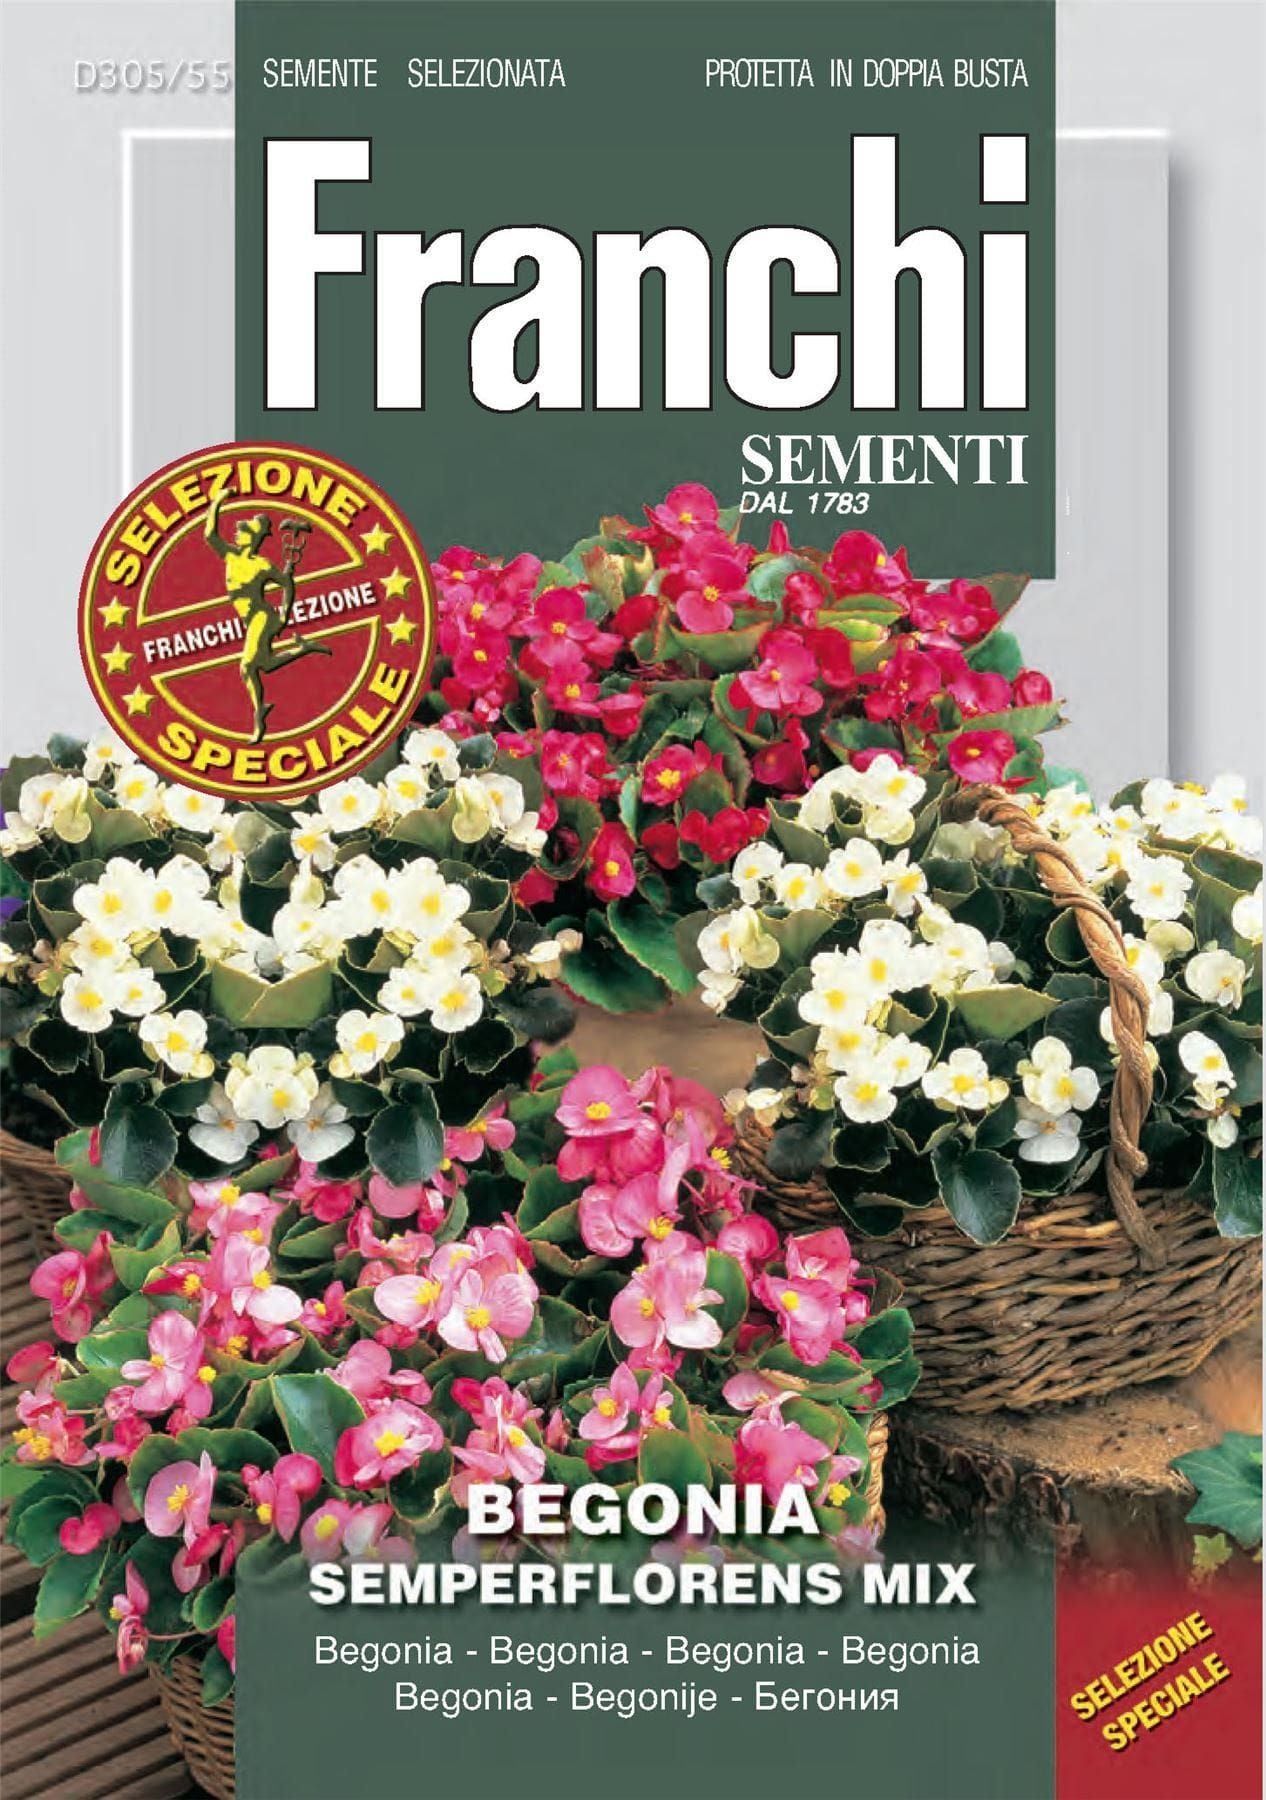 Franchi Seeds of Italy - Flower - FDBF_S 305-55 - Begonia semperflorens Mix - Seeds